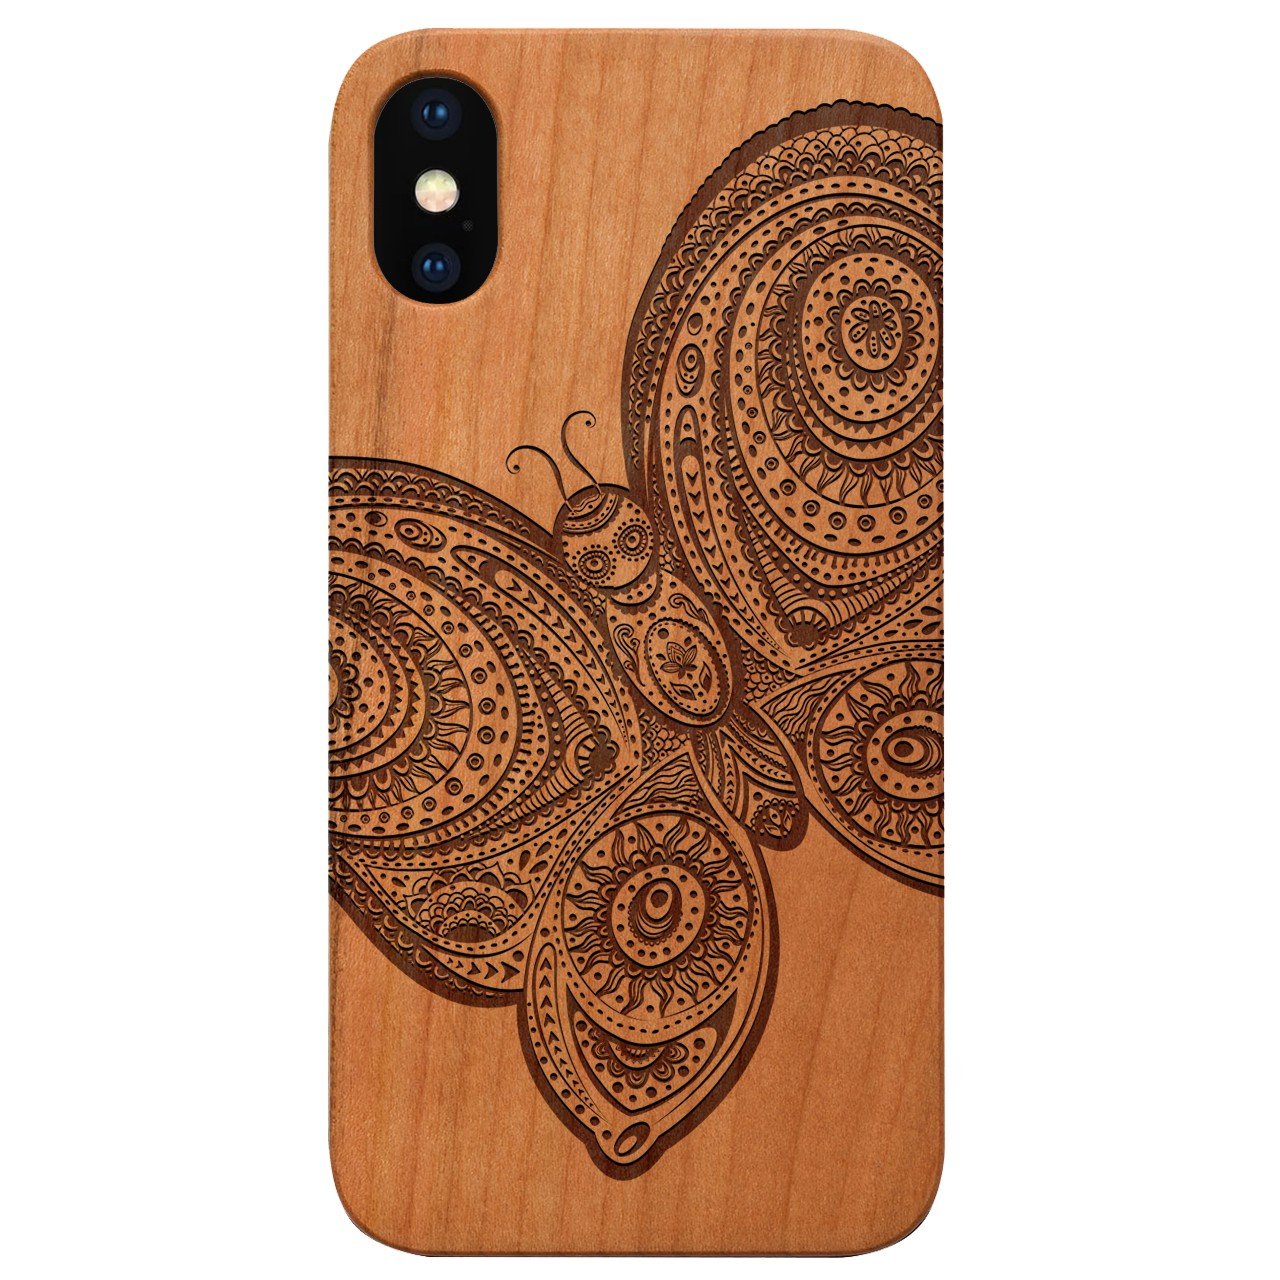 Butterfly 3 - Engraved - Wooden Phone Case